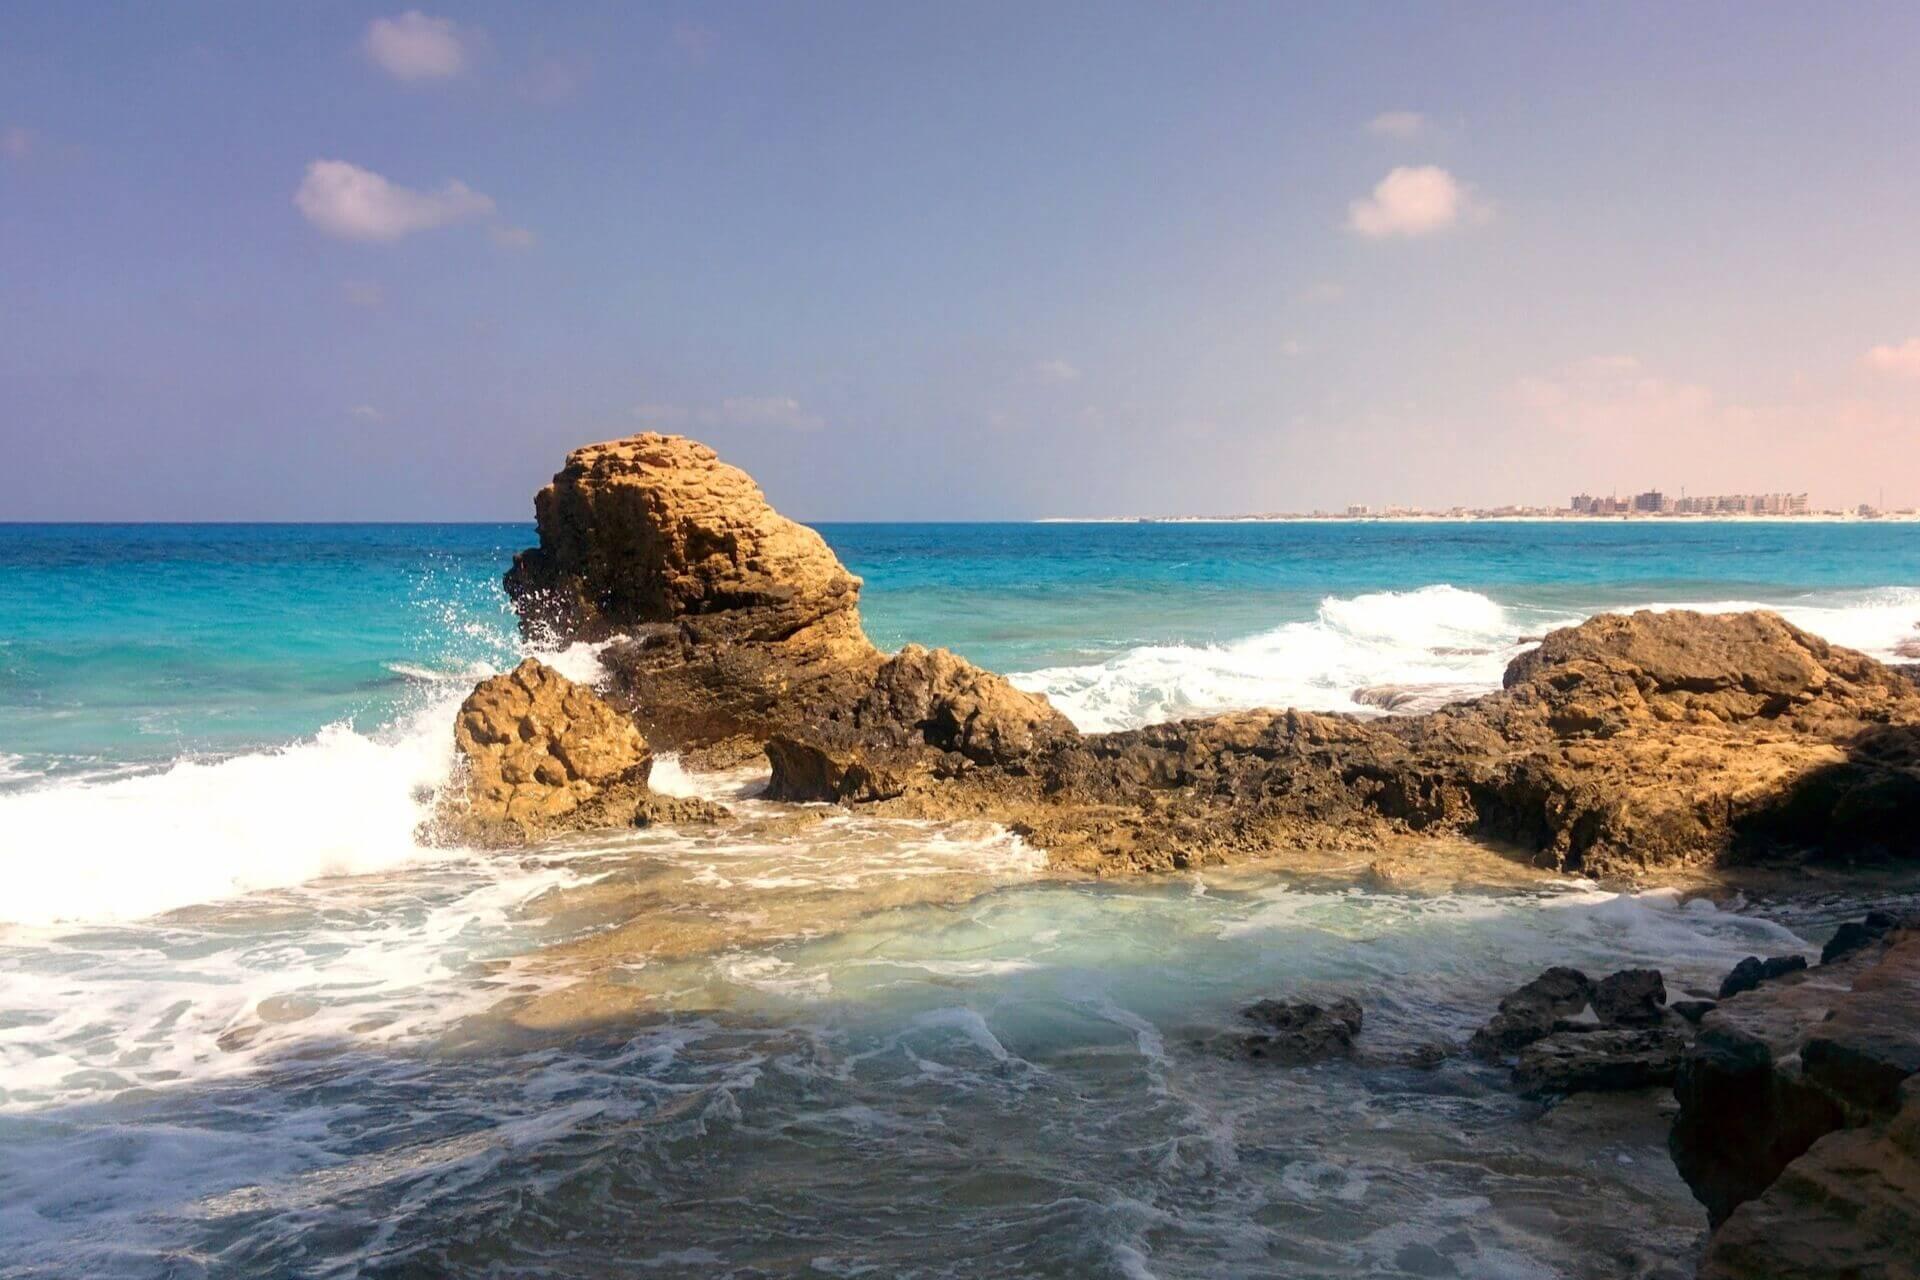 View of a rock formation in the sea at Marsa Matrouh, Egypt.